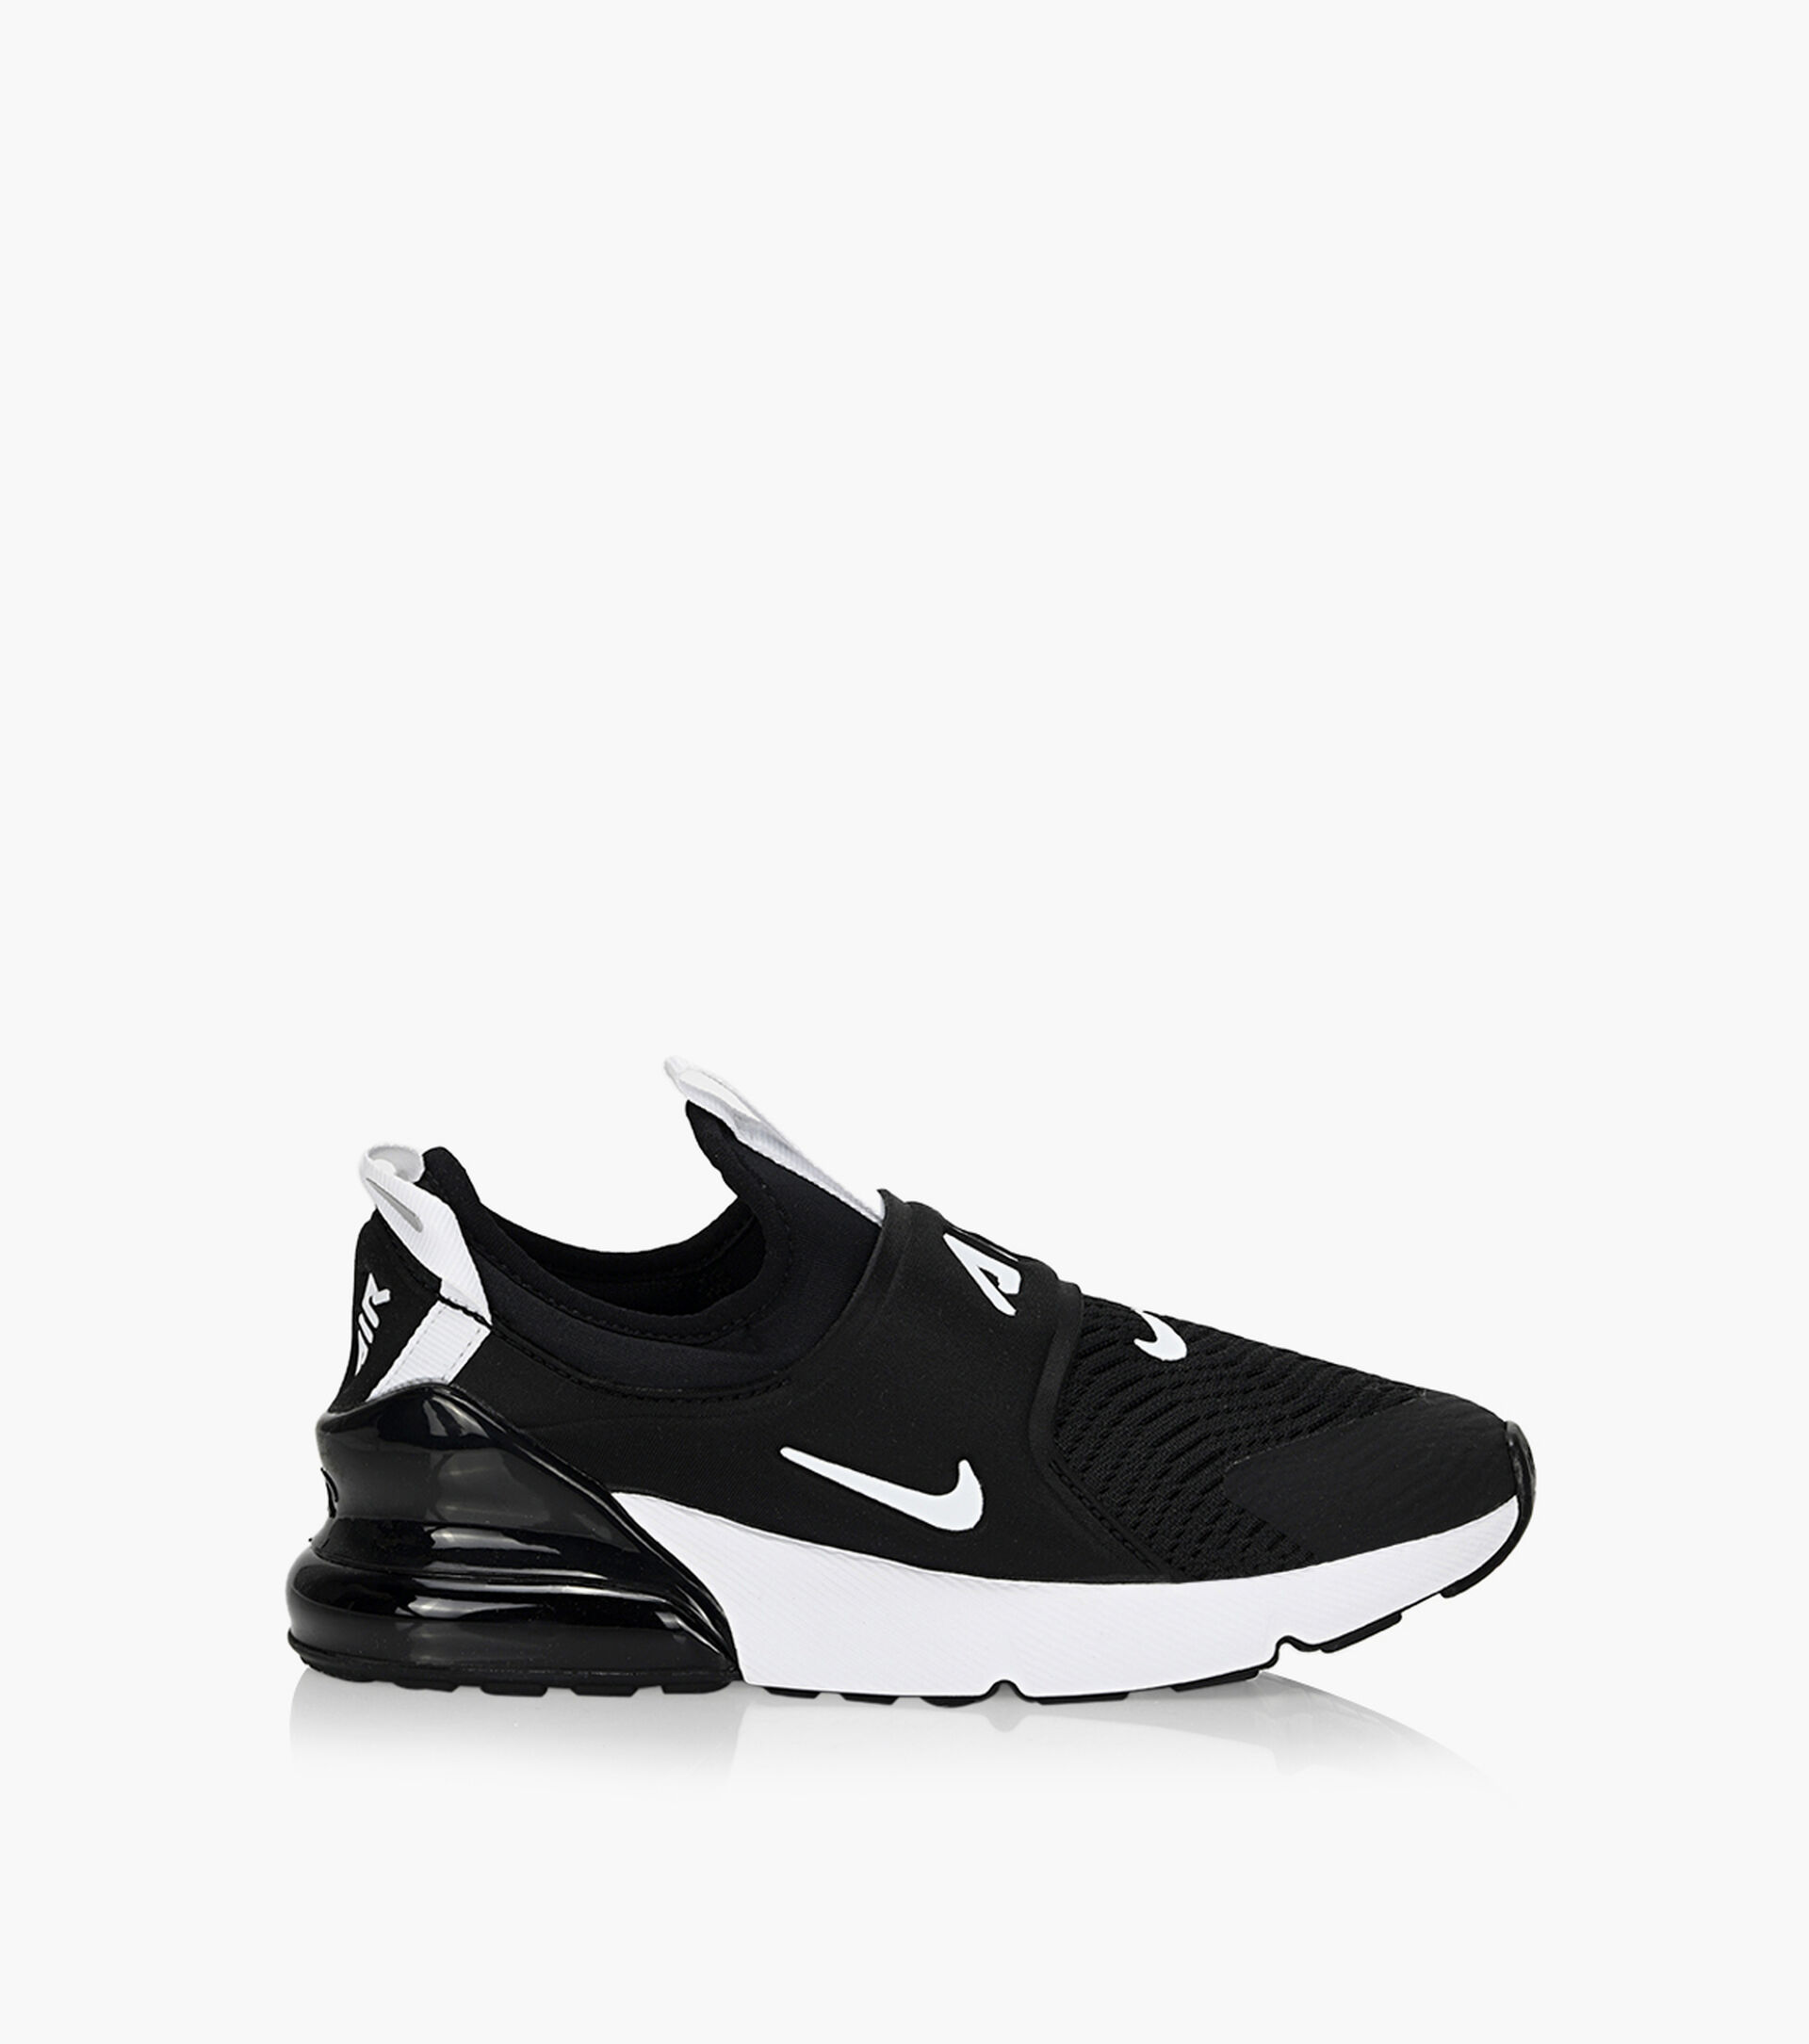 NIKE AIR MAX 270 EXTREME - Black | Browns Shoes